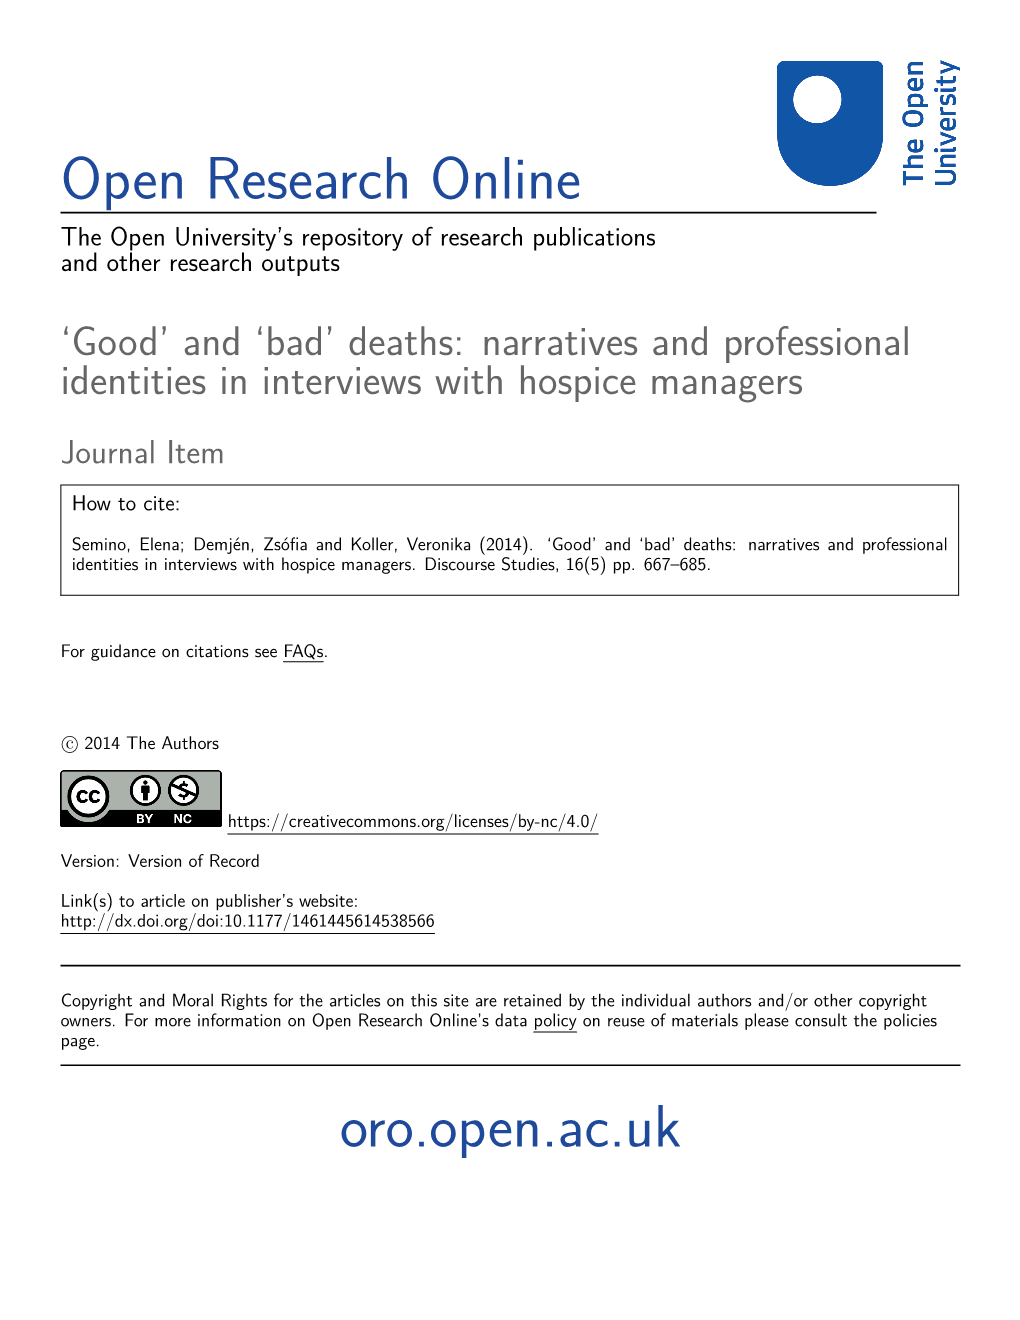 Deaths: Narratives and Professional Identities in Interviews with Hospice Managers